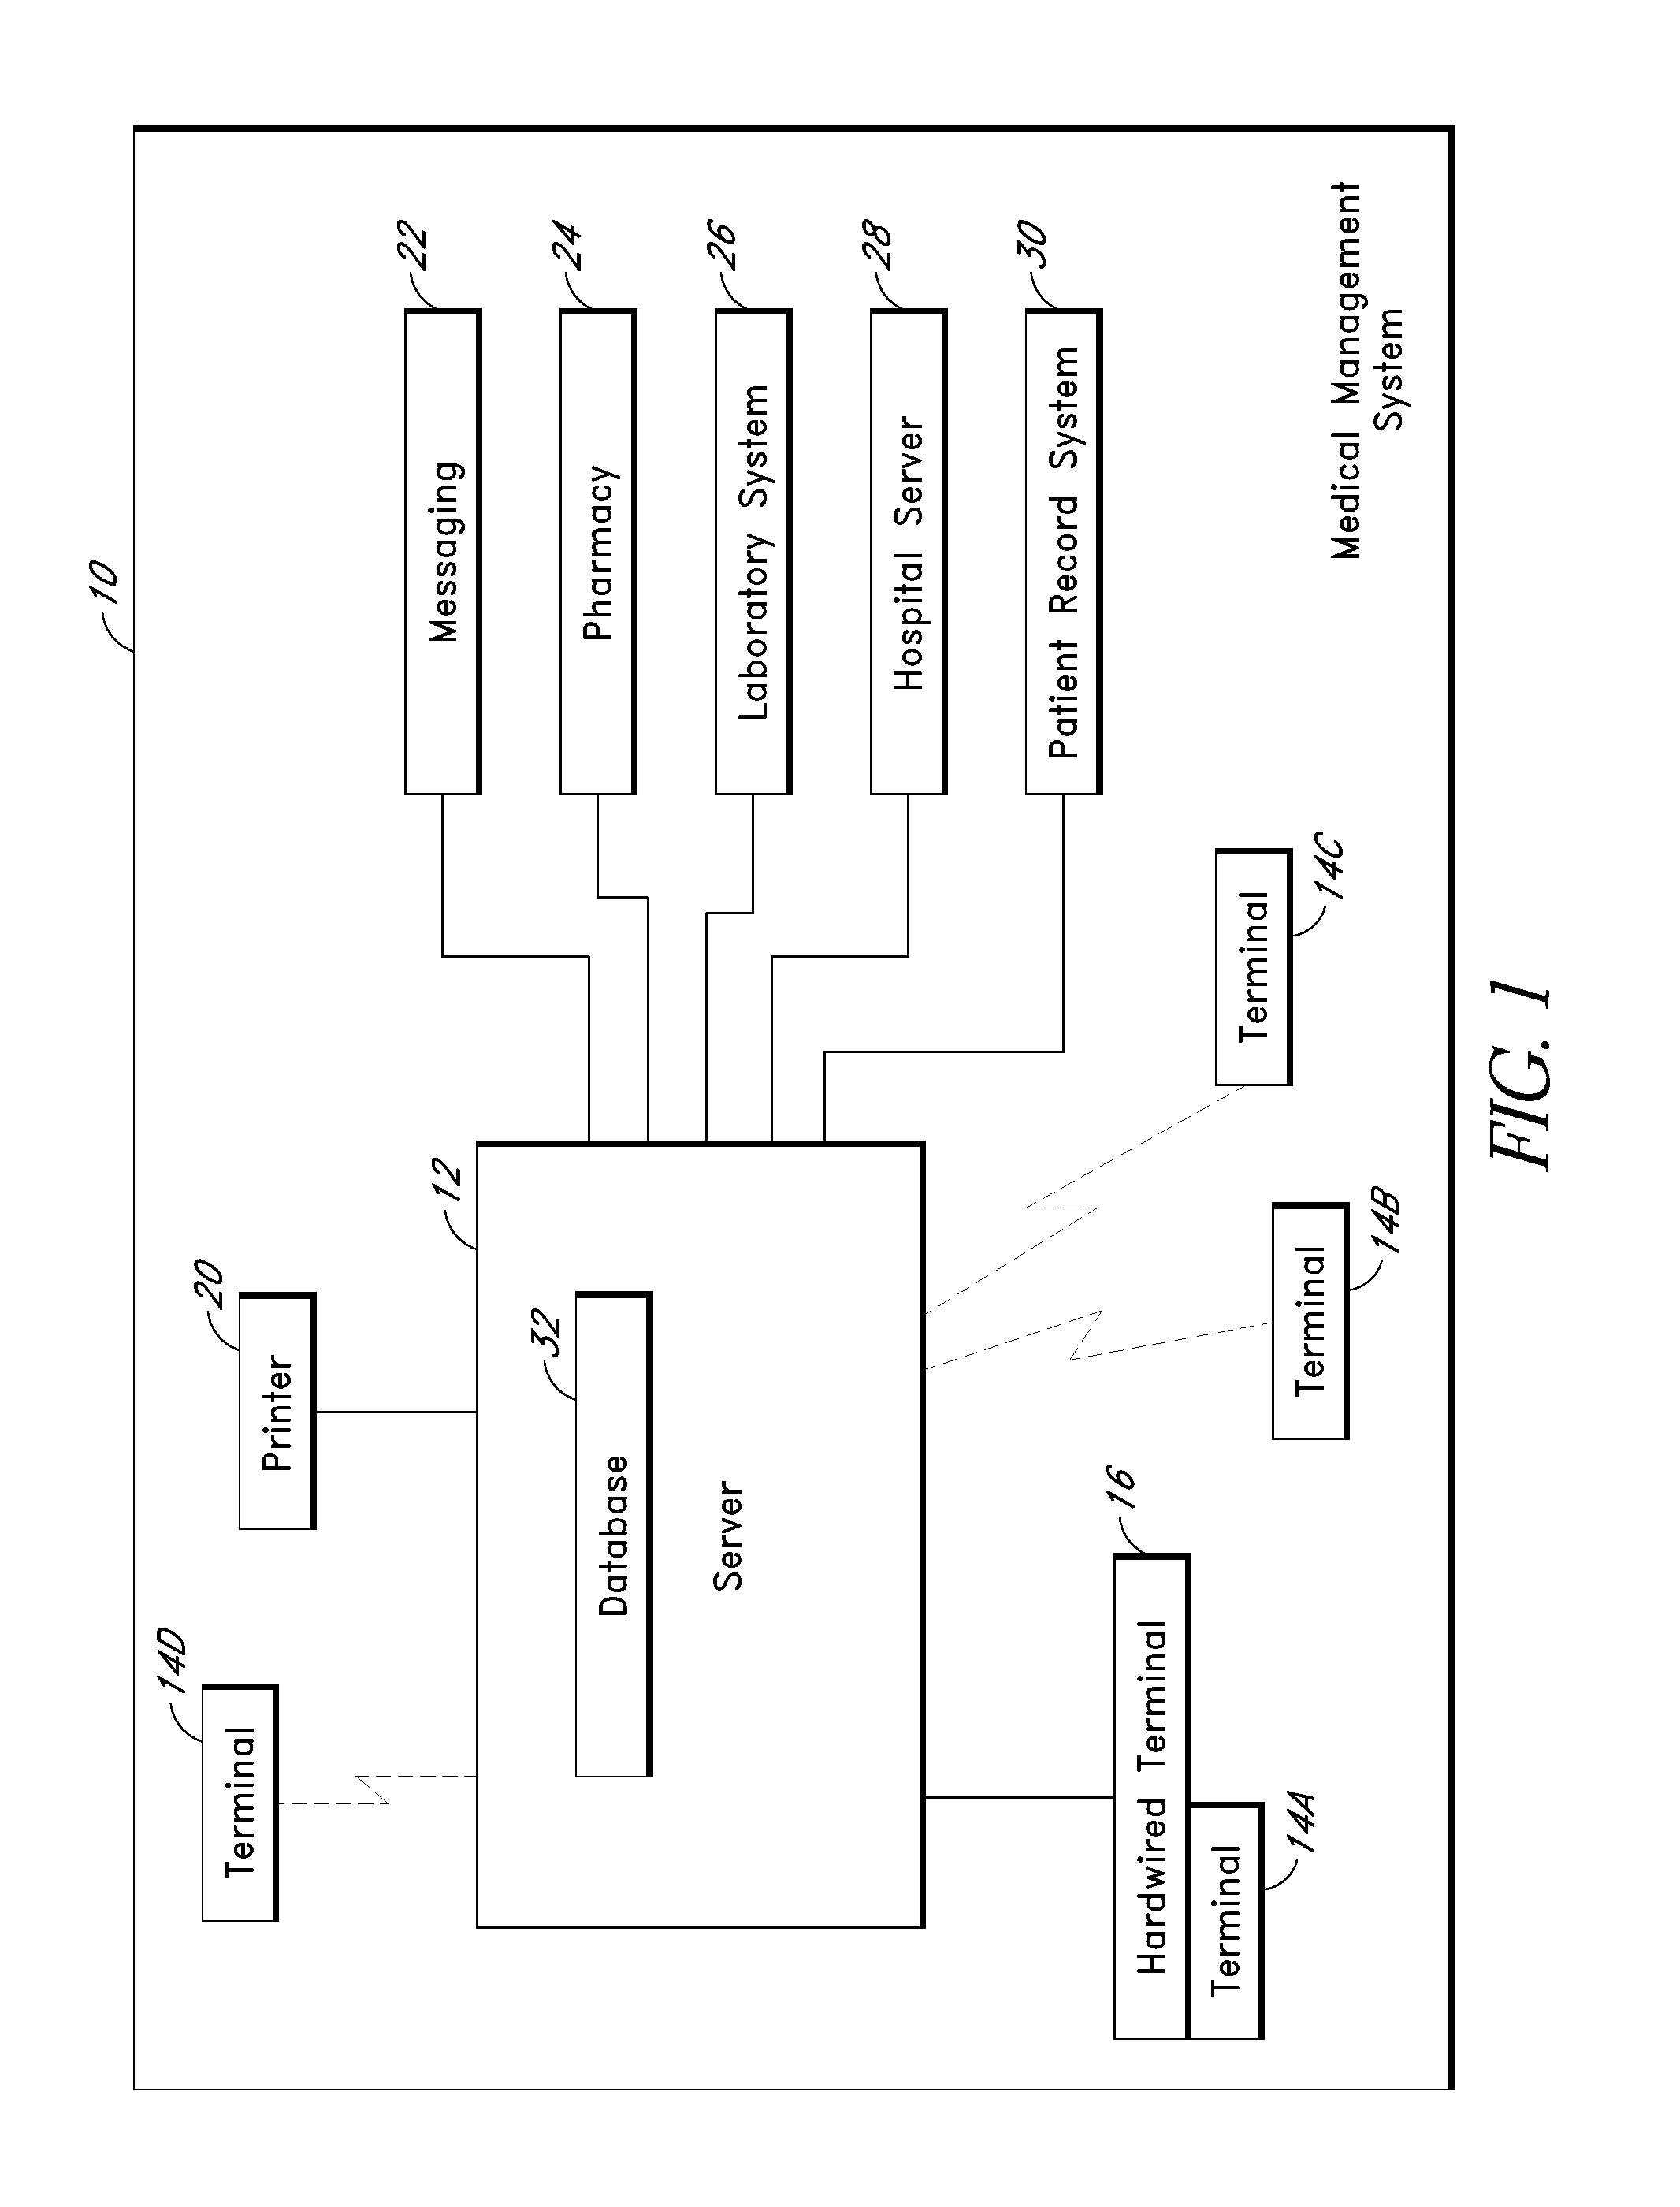 Method of displaying patient data in a medical workflow environment